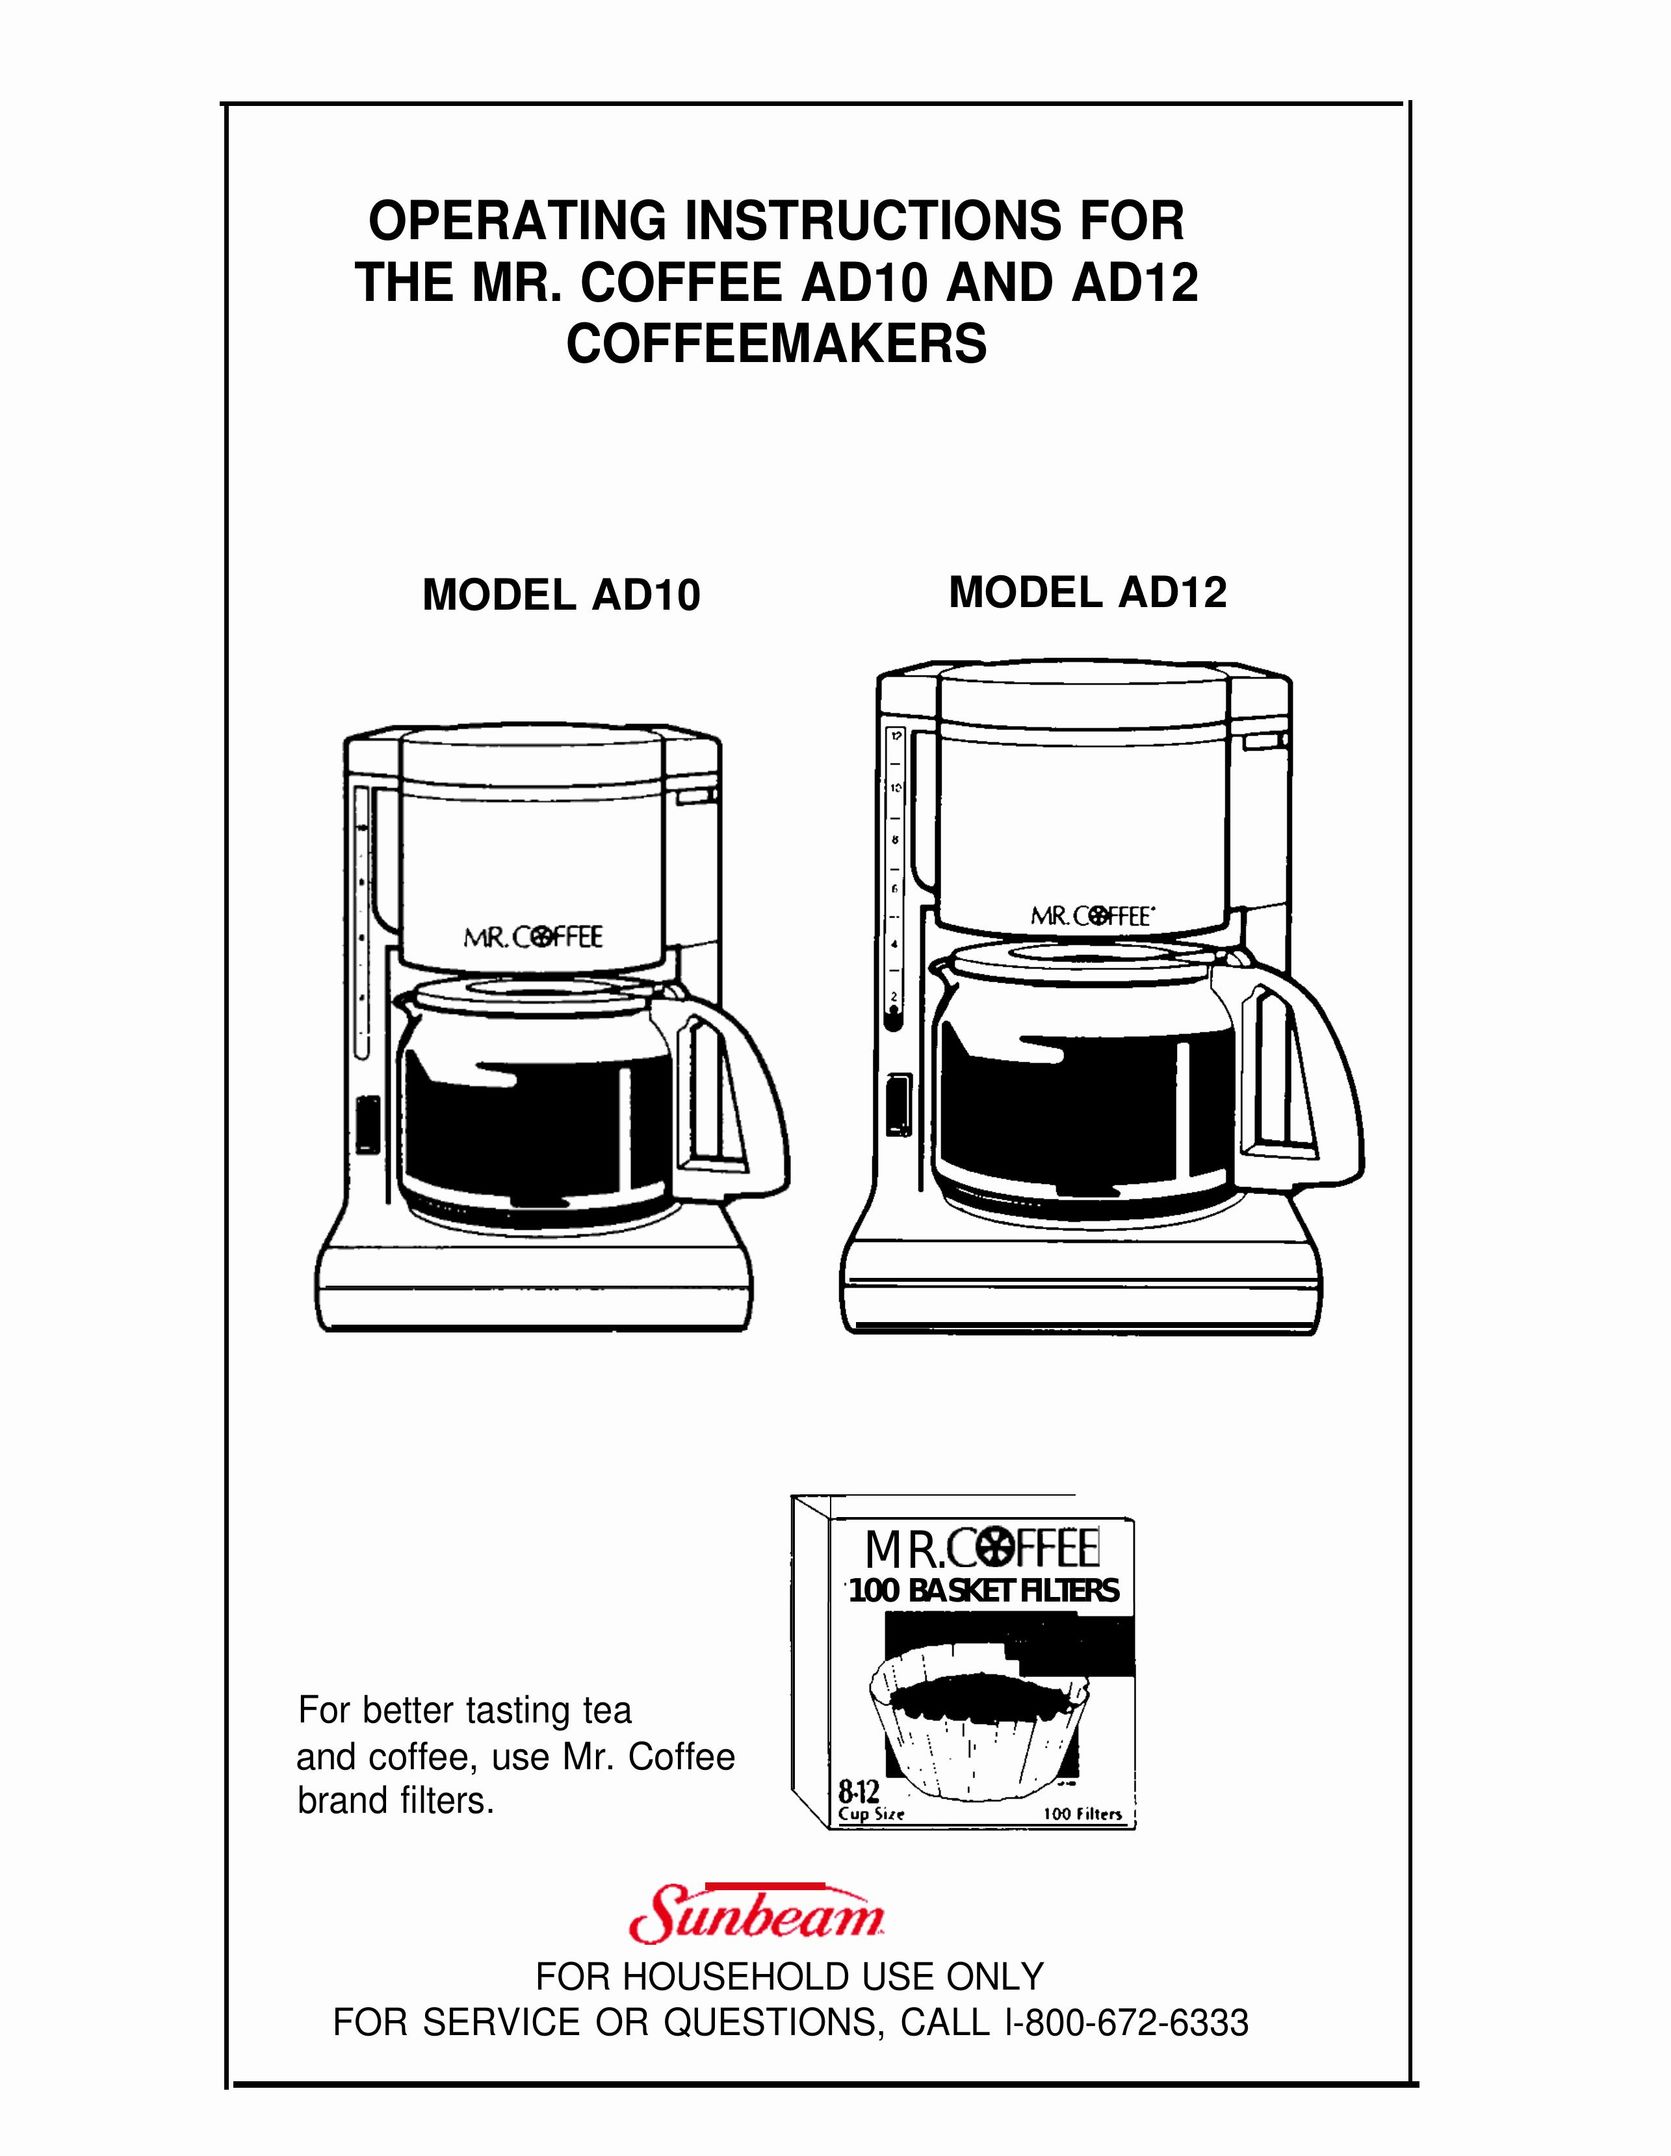 Mr. Coffee AD10 AND AD12 Coffeemaker User Manual